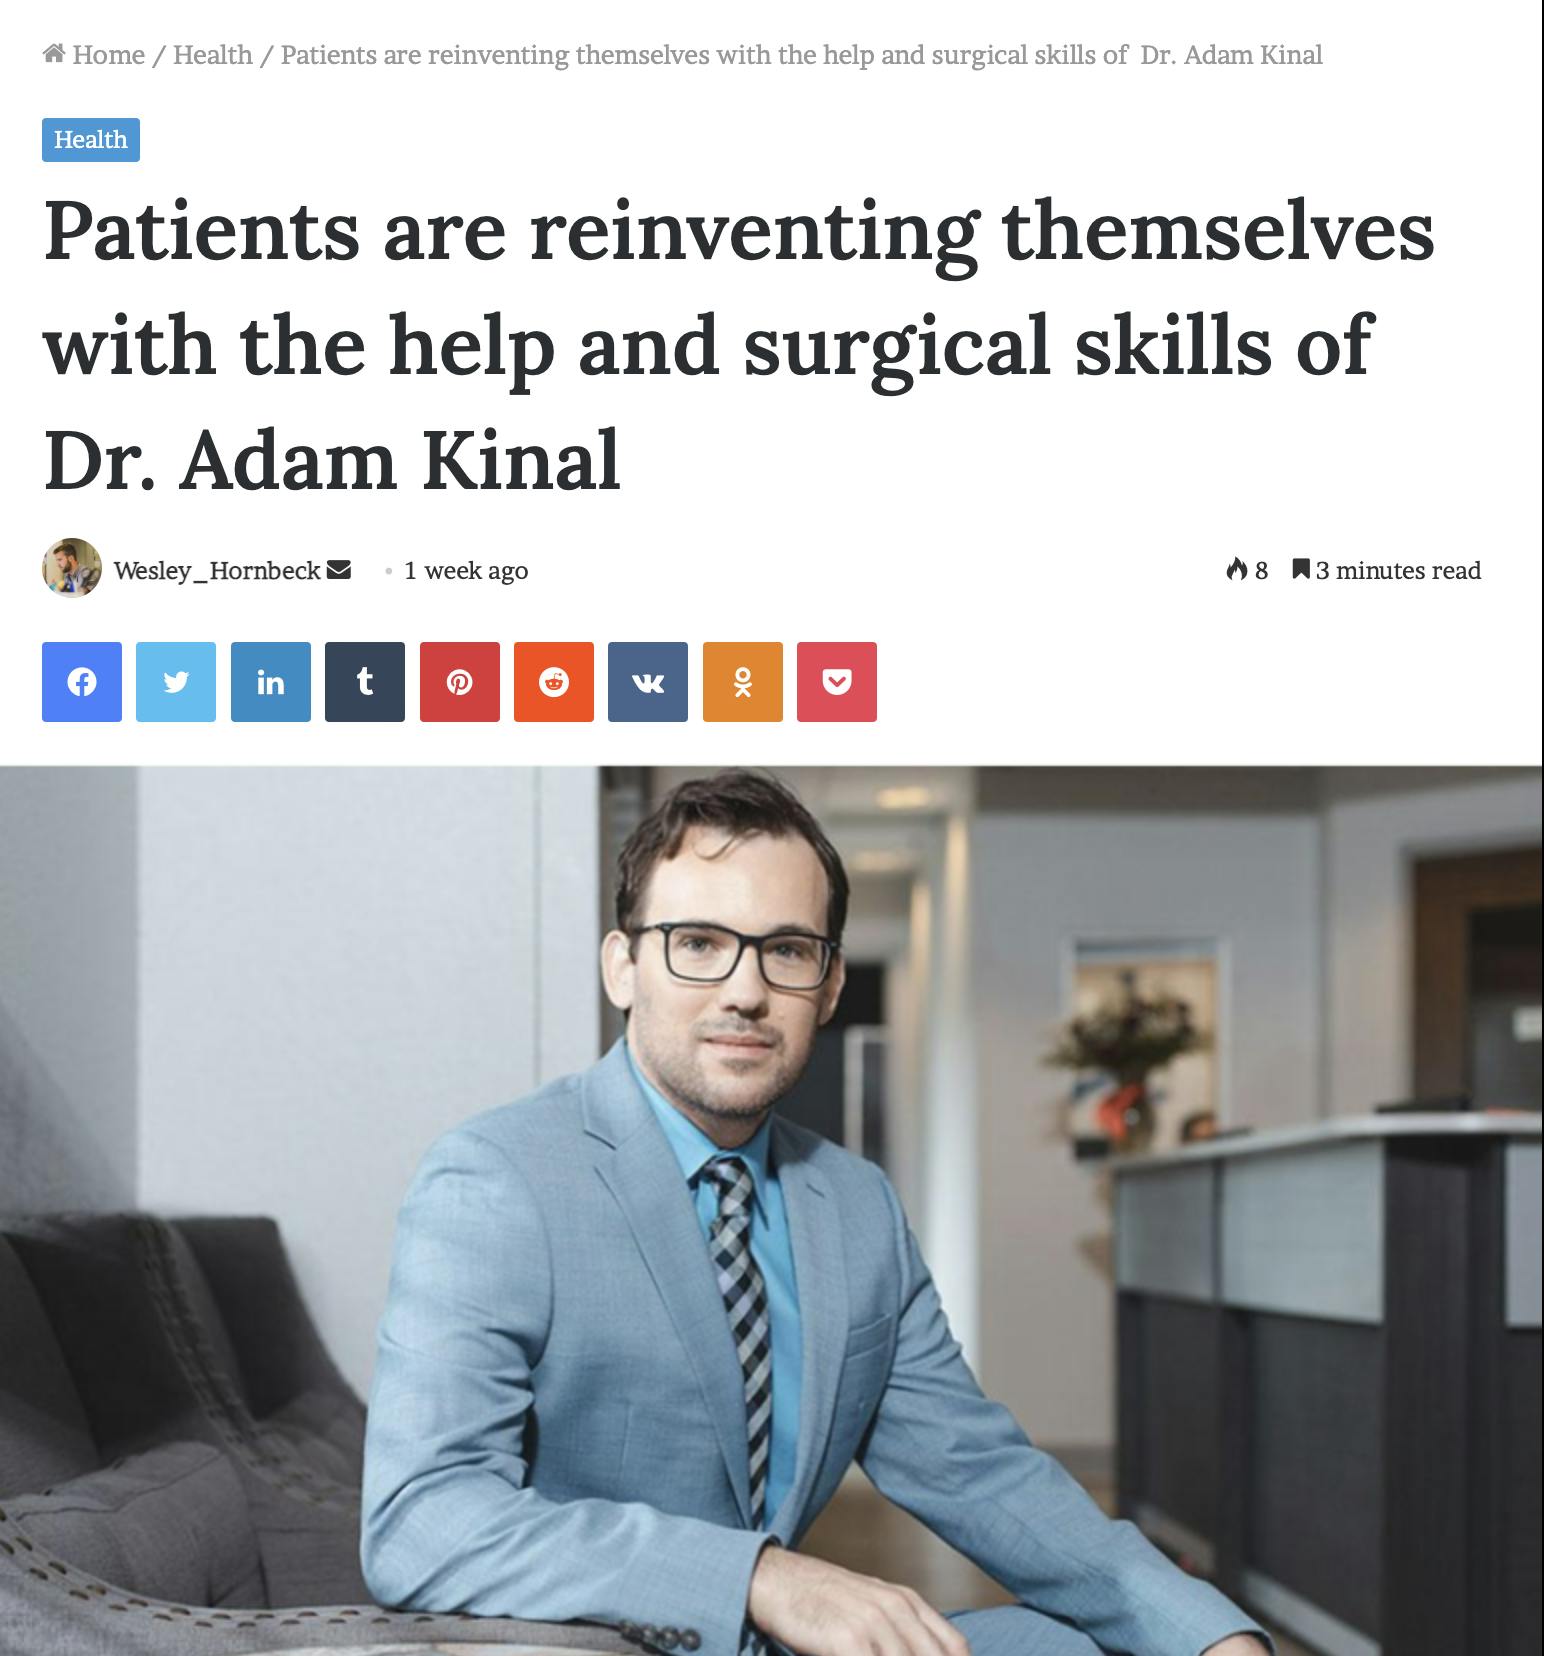 Patients are reinventing themselves with the help and surgical skills of Dr. Adam Kinal